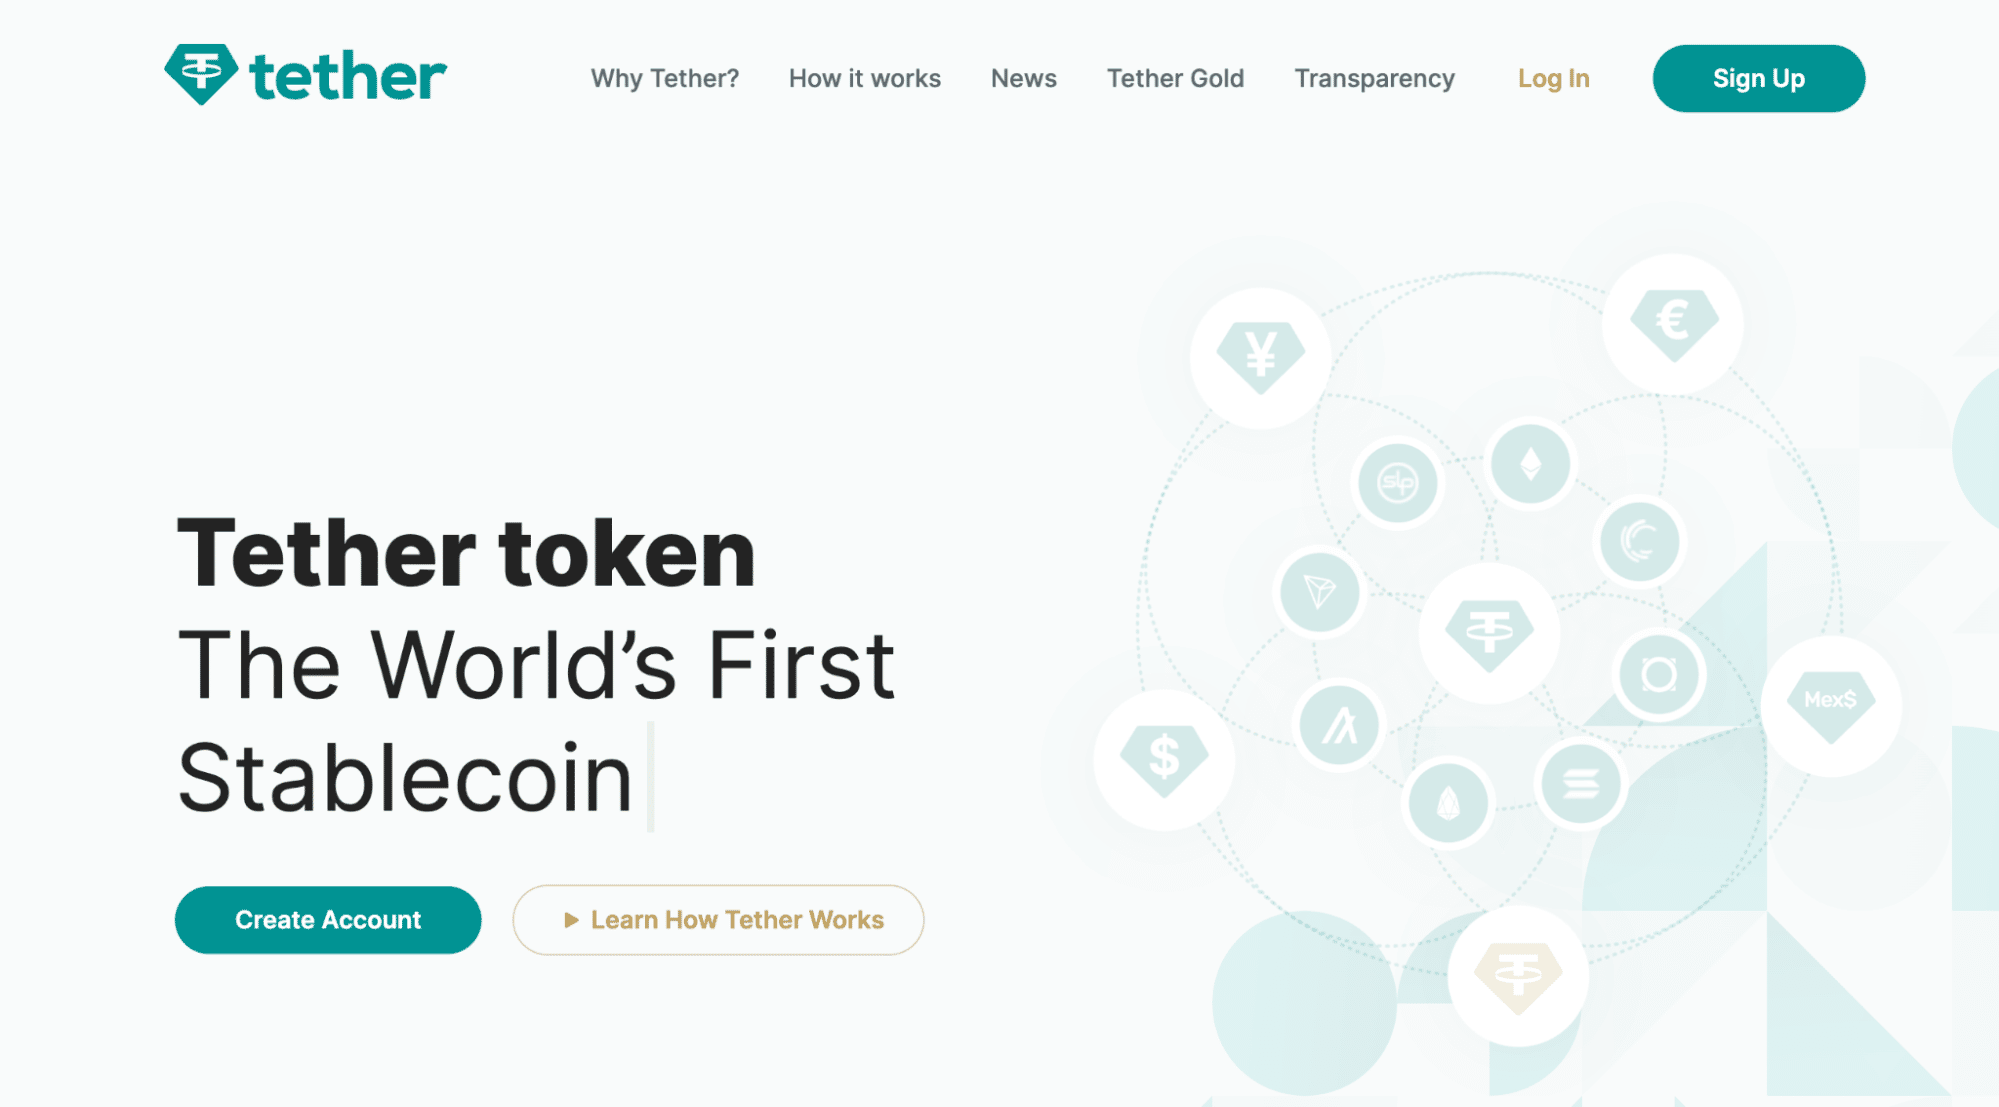 Tether’s homepage